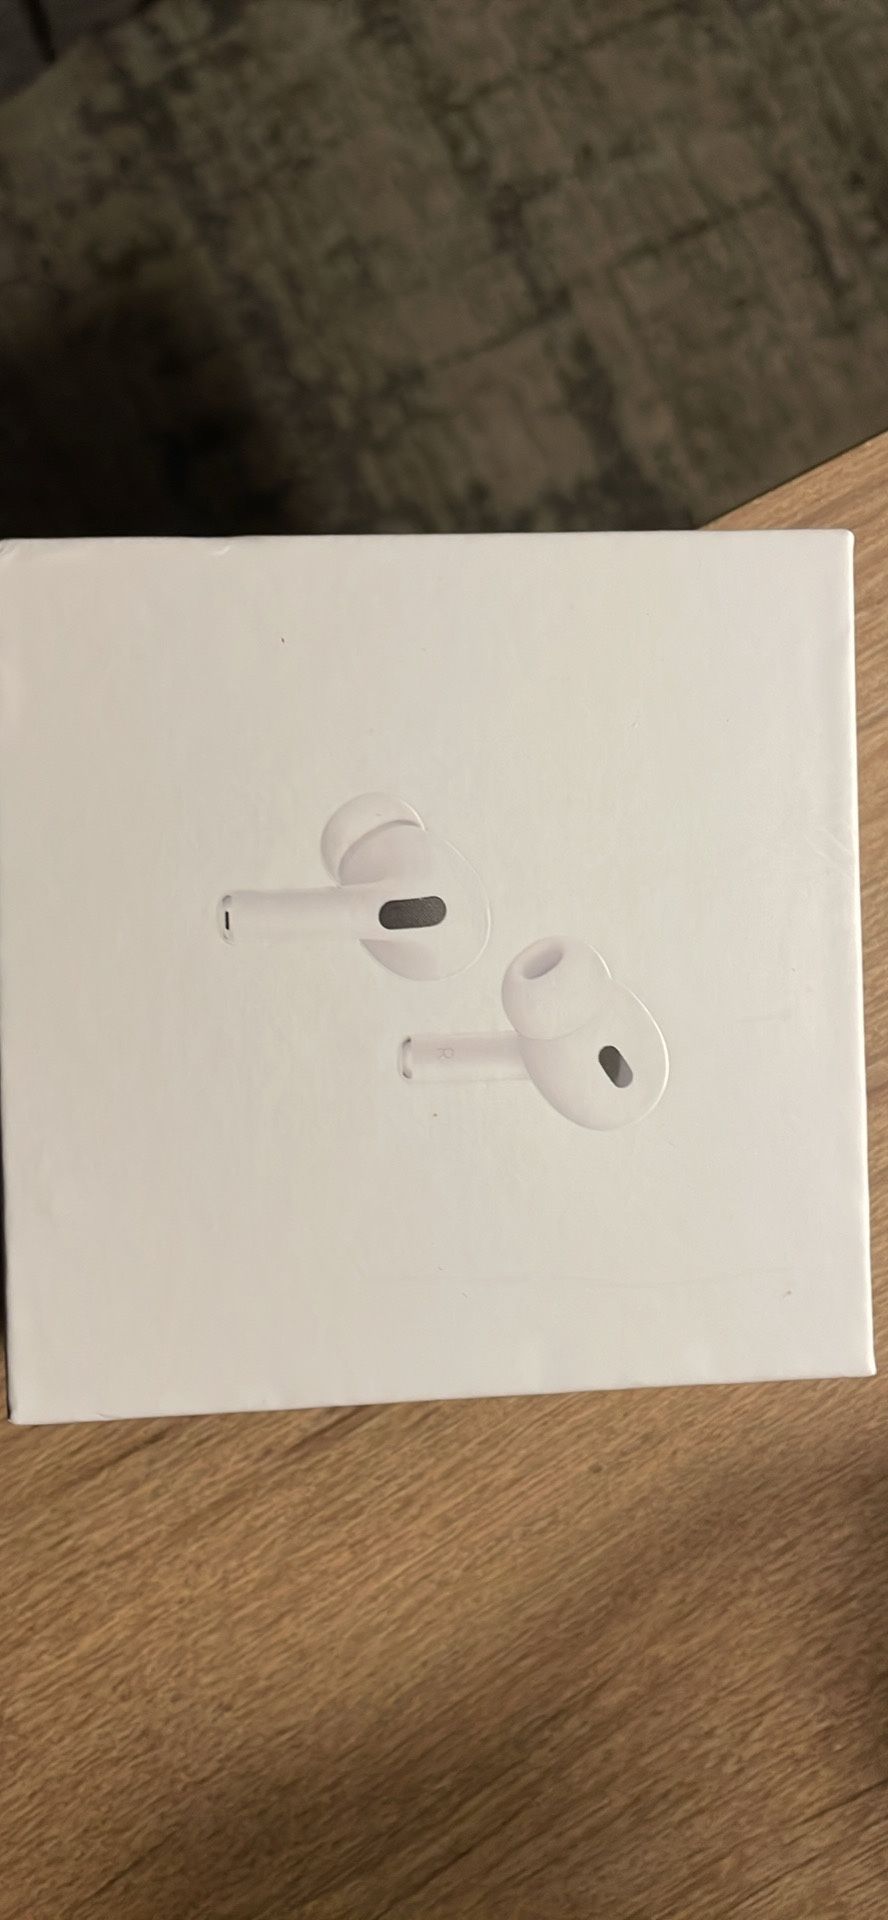 Air Pods Pro Generation 2 